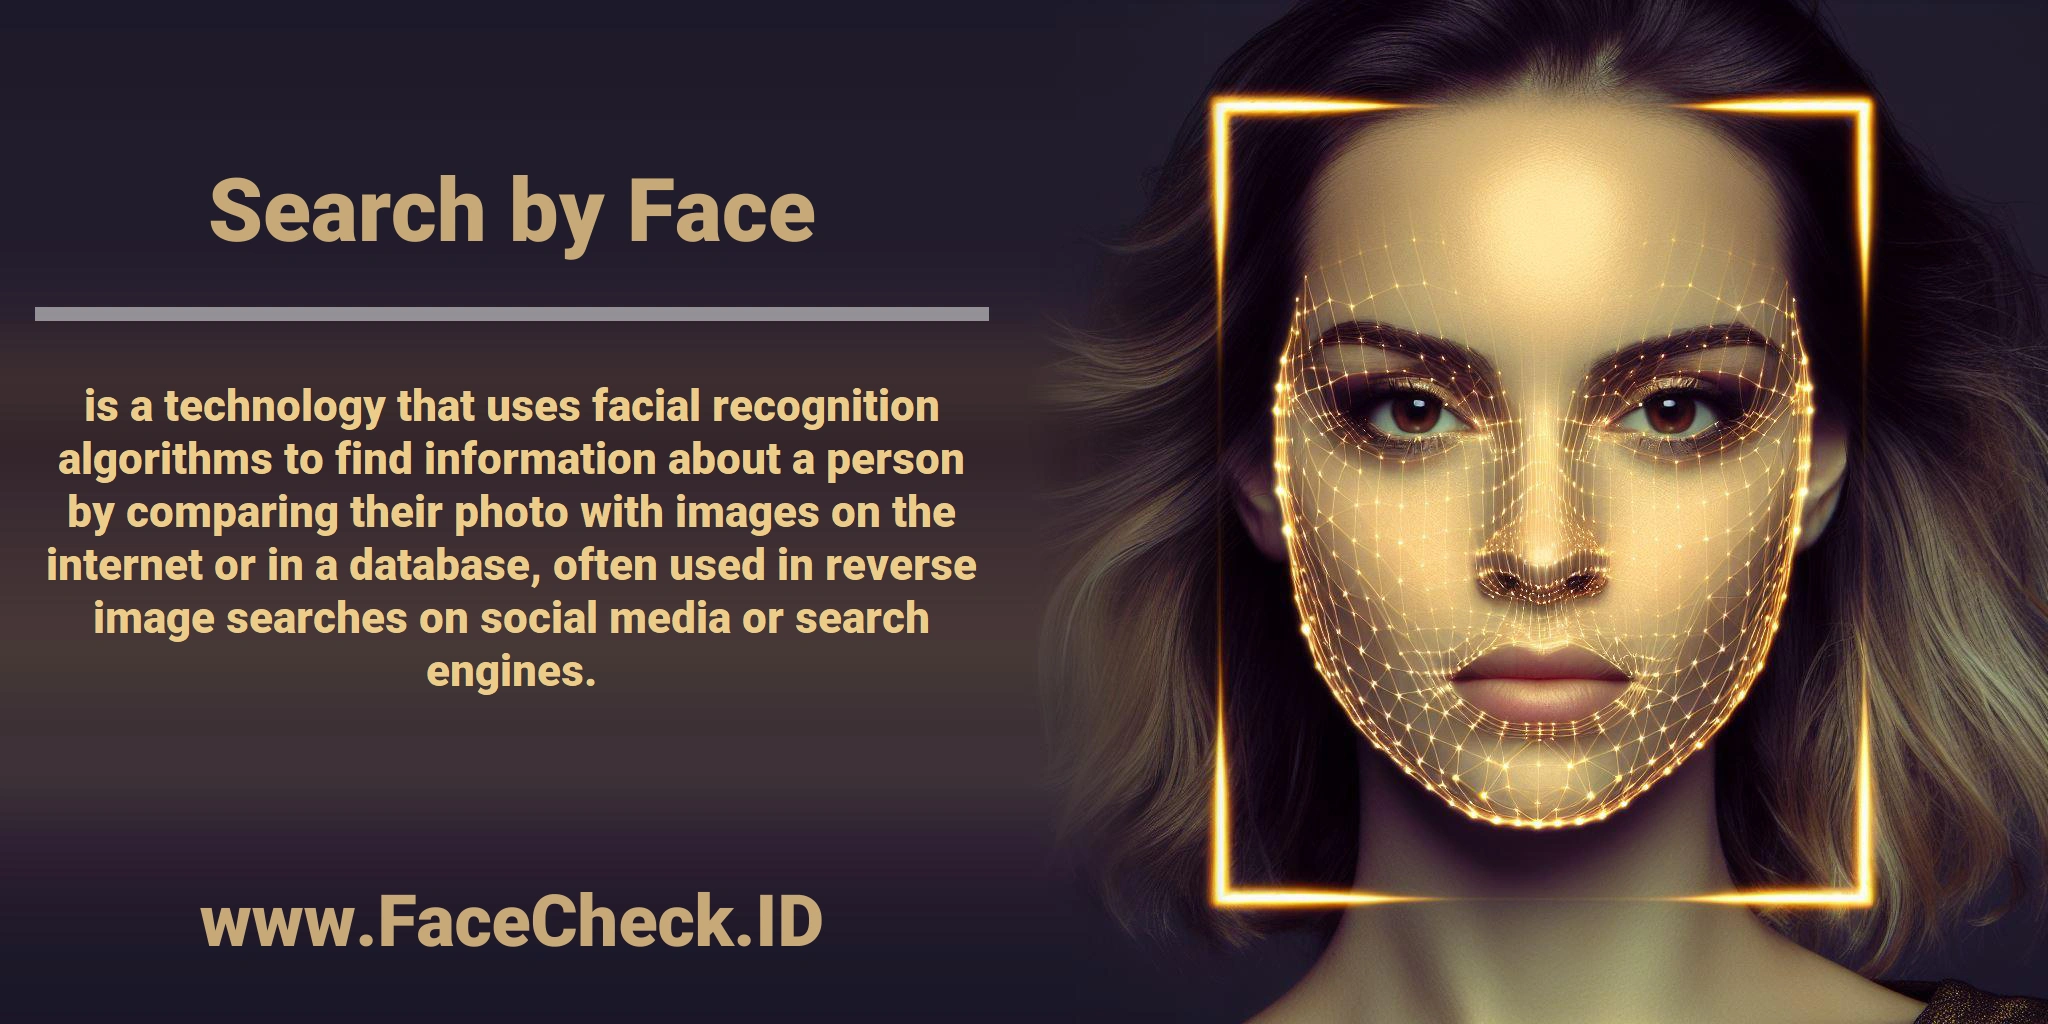 <b>Search by Face</b> is a technology that uses facial recognition algorithms to find information about a person by comparing their photo with images on the internet or in a database, often used in reverse image searches on social media or search engines.